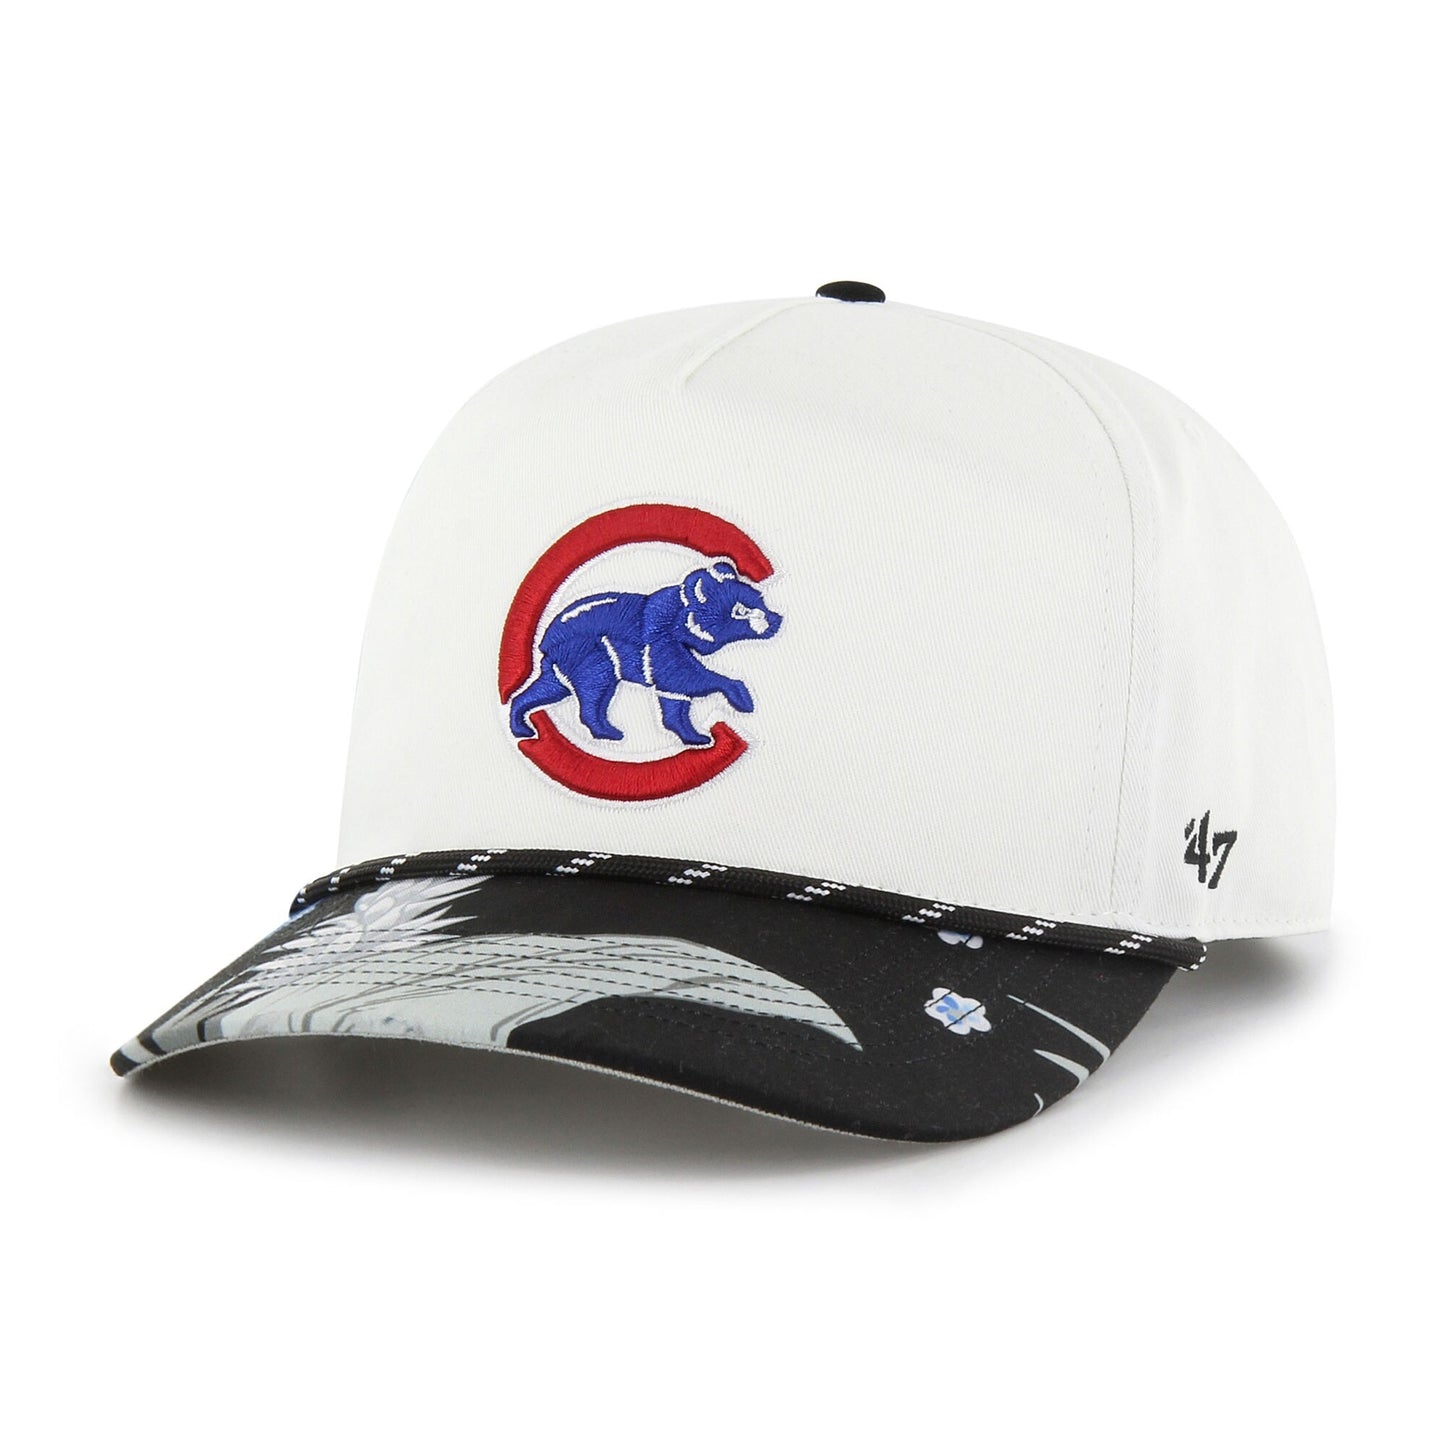 Chicago Cubs '47 Dark Tropic Hitch Snapback Hat - White